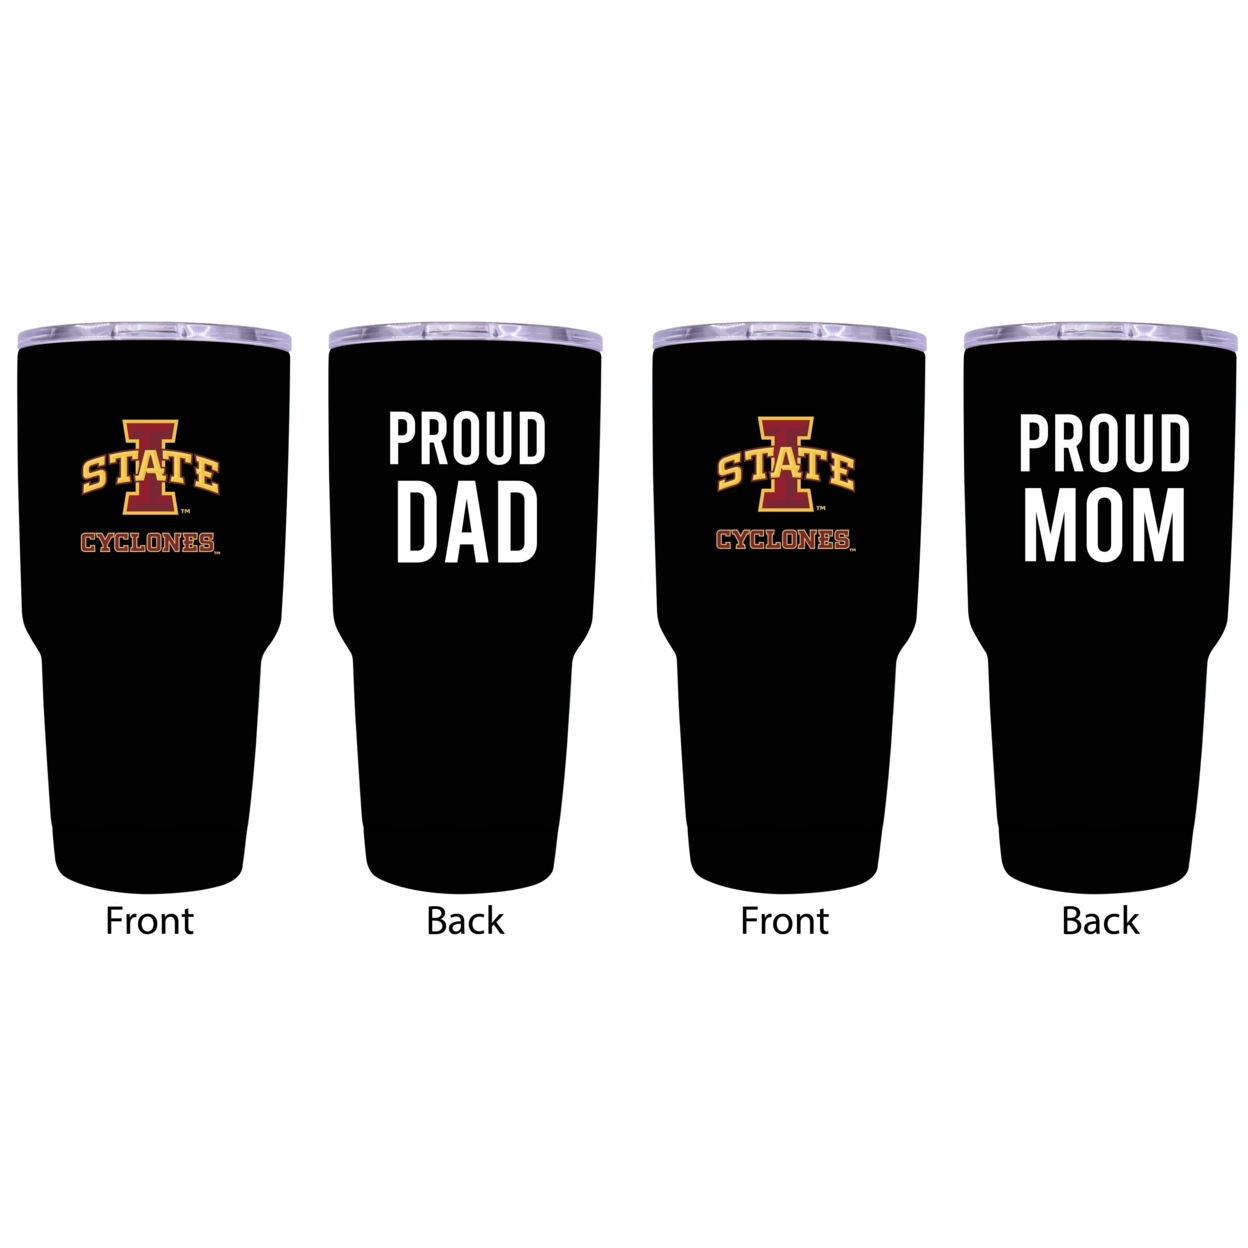 Iowa State Cyclones Proud Mom And Dad 24 Oz Insulated Stainless Steel Tumblers 2 Pack Black.